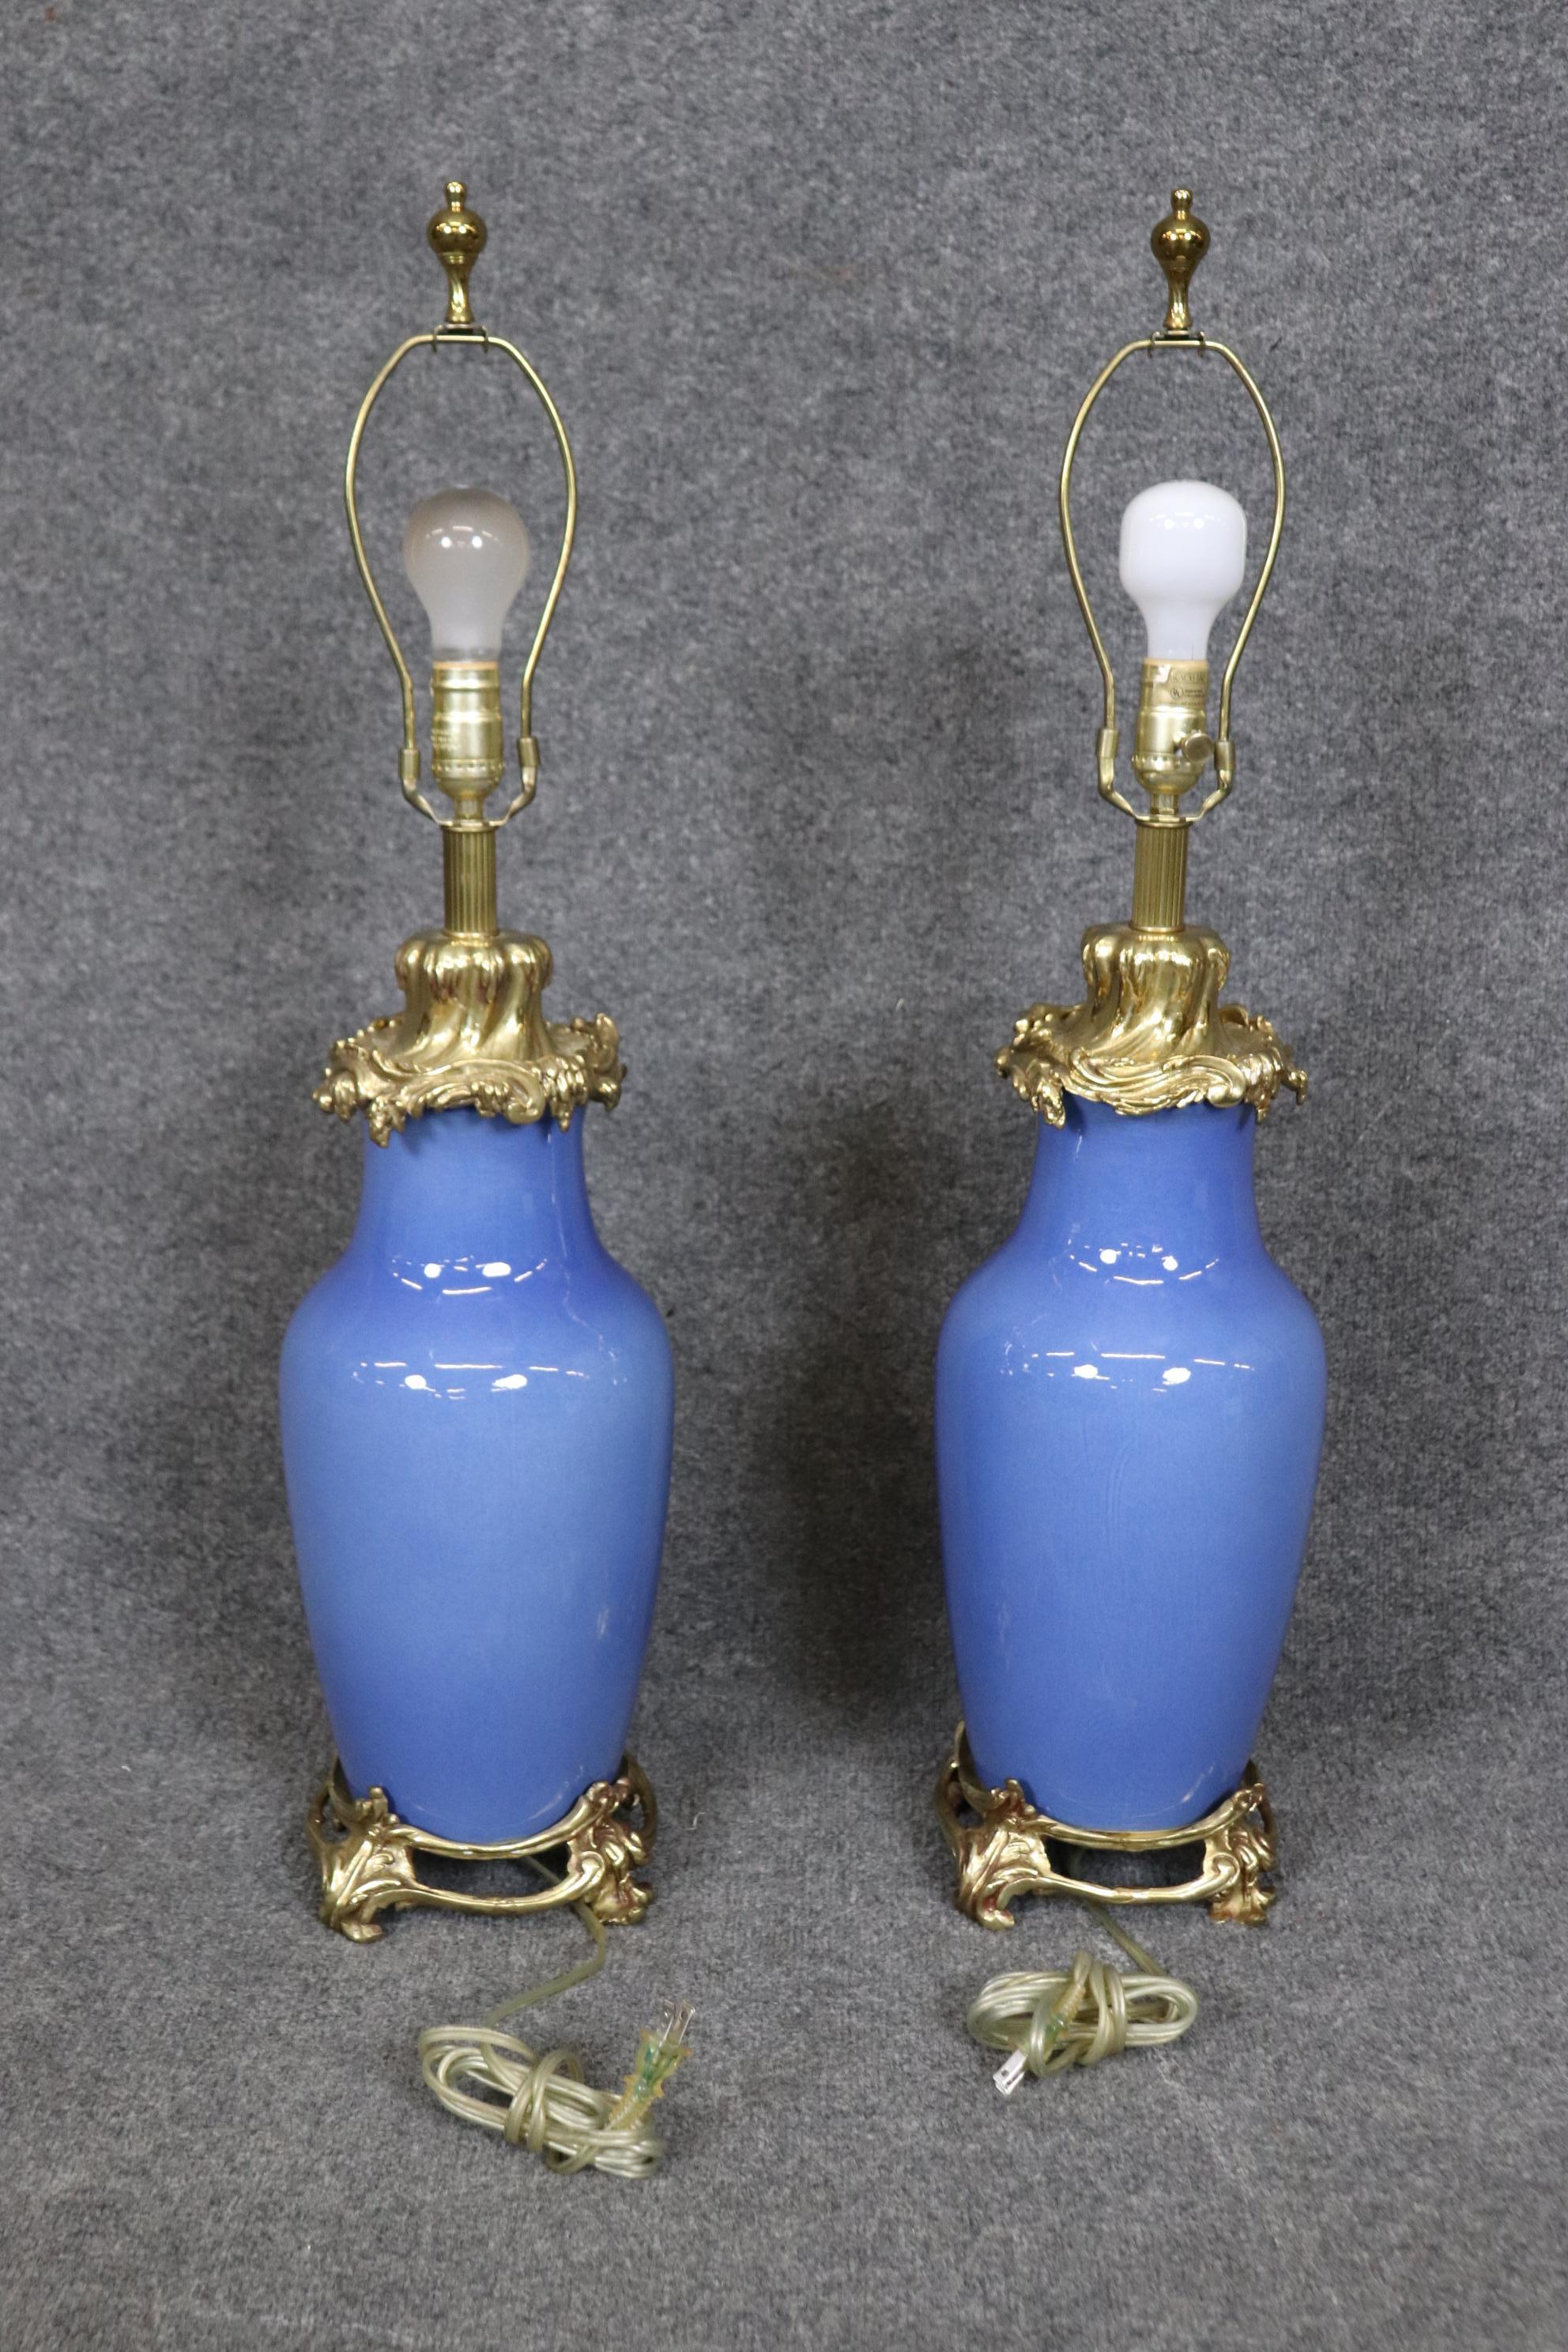 Outstanding Pair Bronze French Rococo Cobalt Blue Porcelain Table Lamps  In Good Condition For Sale In Swedesboro, NJ